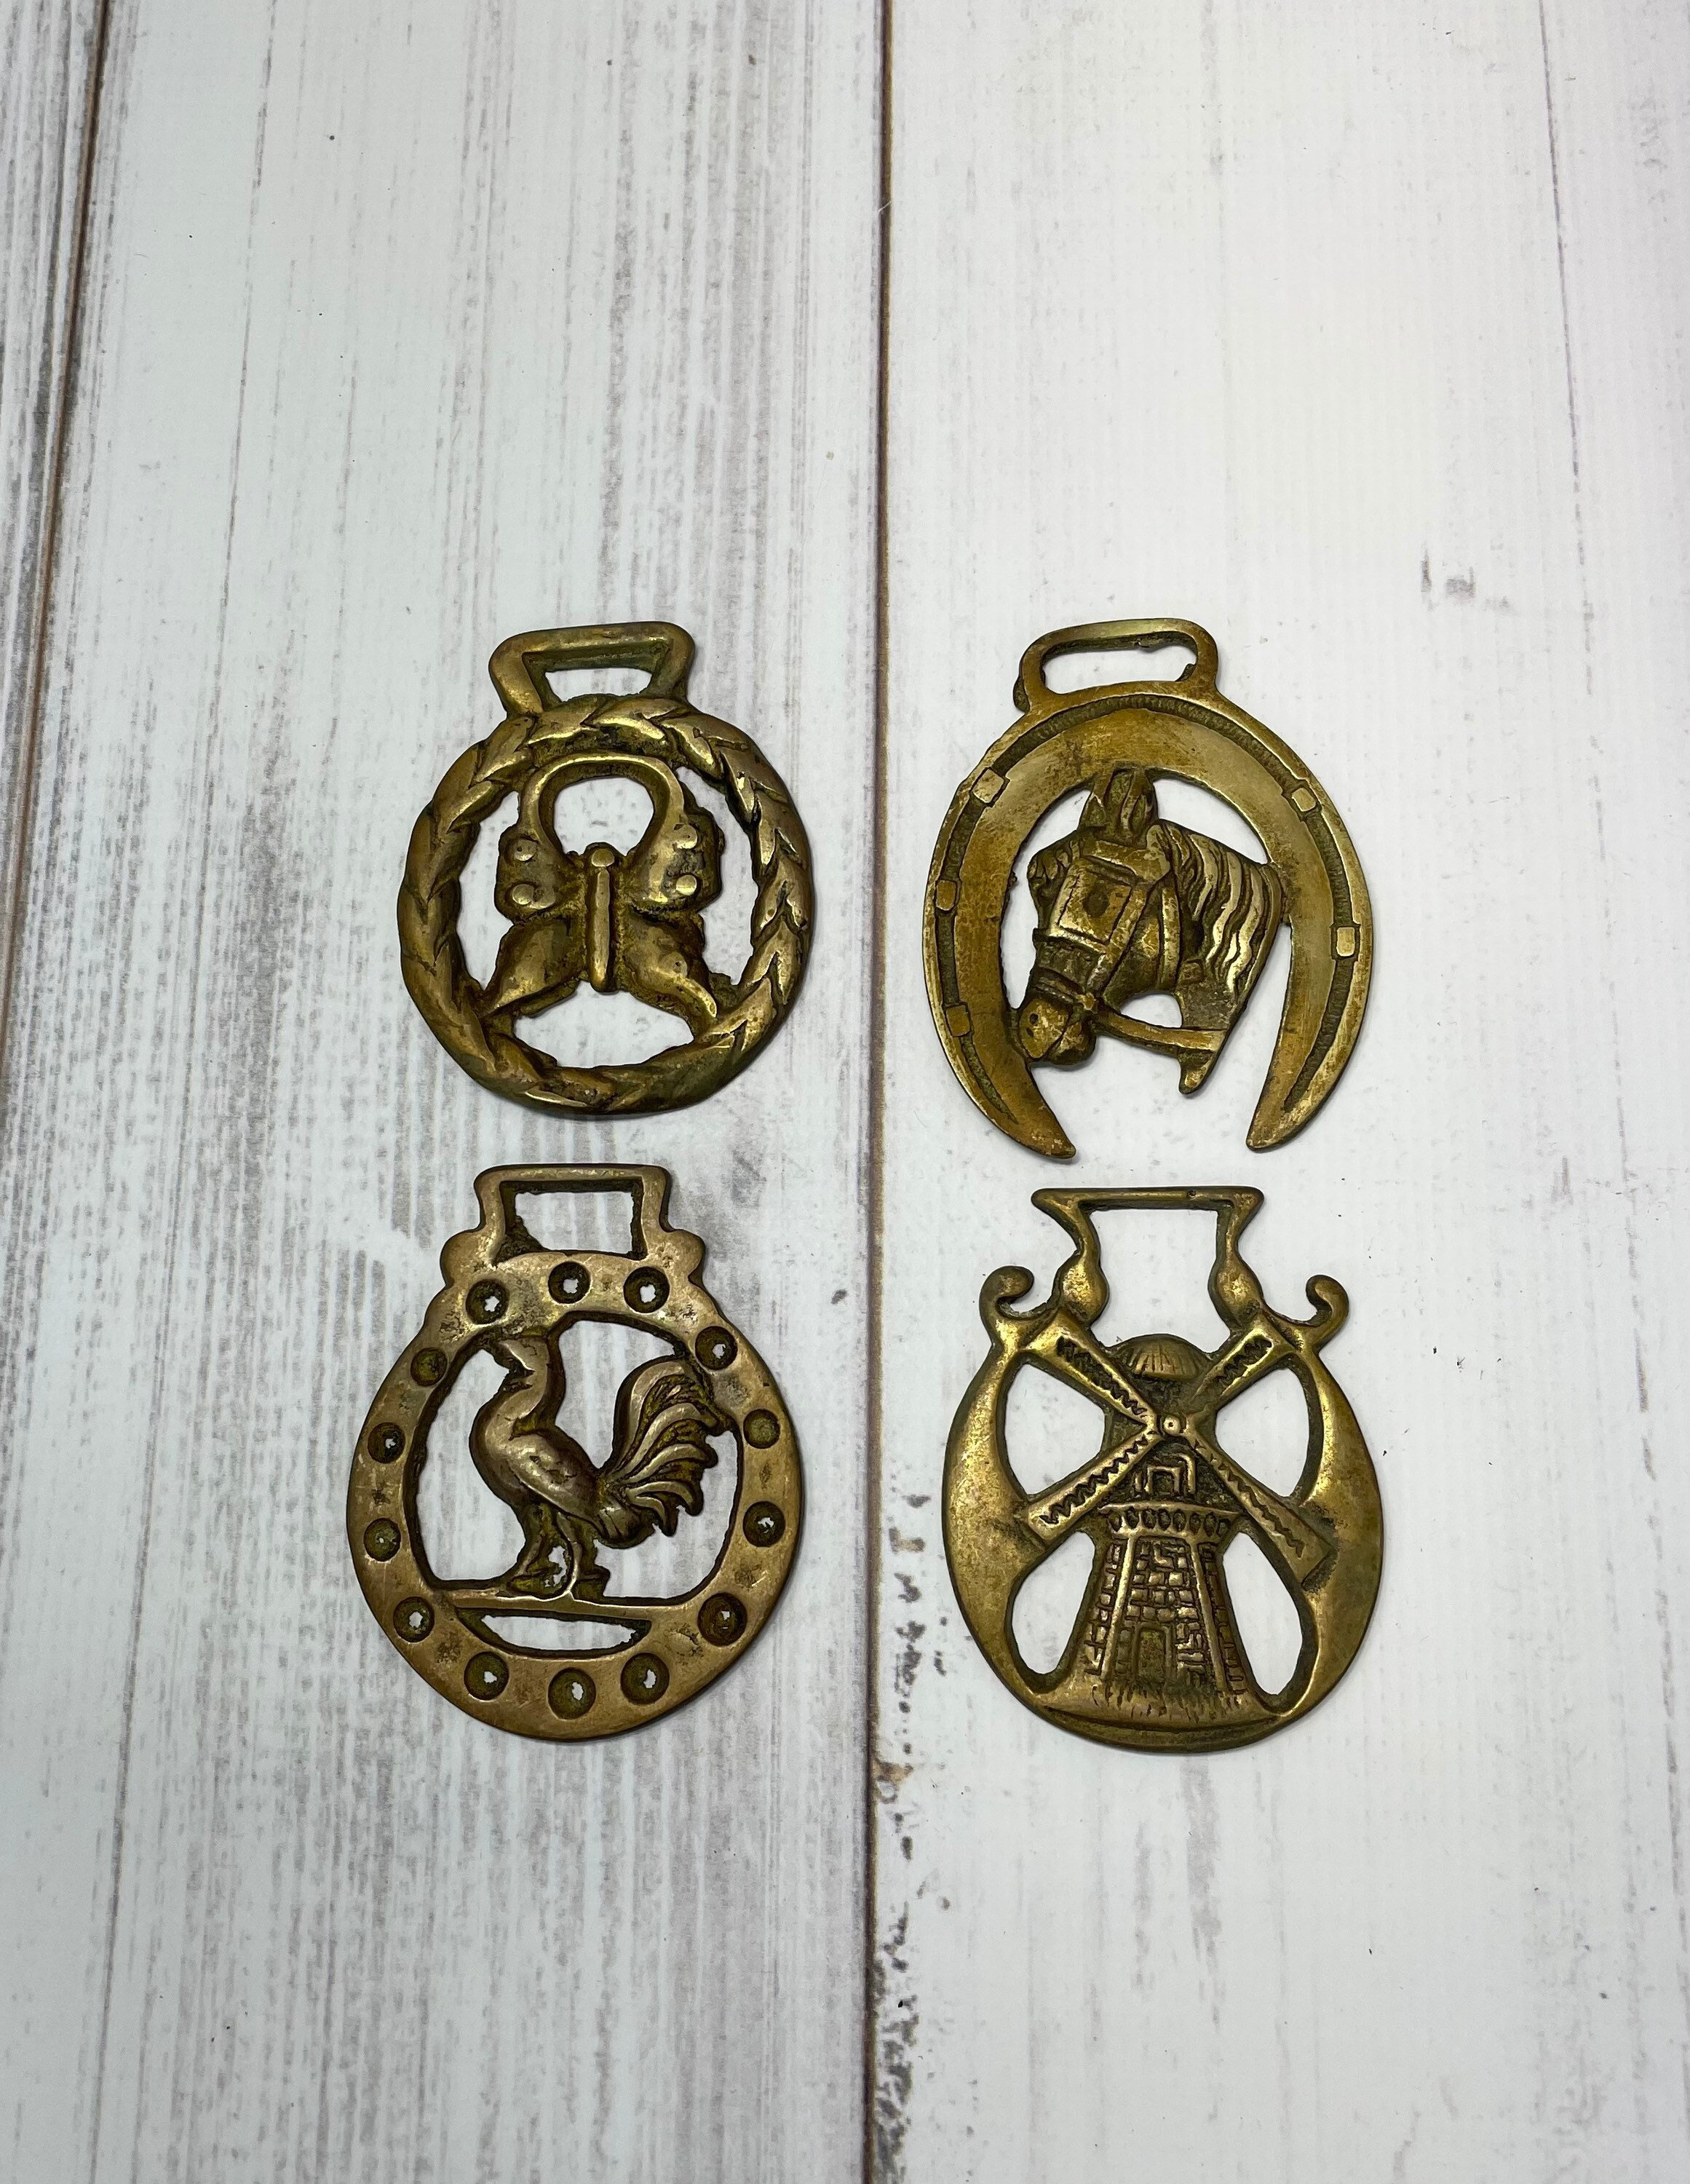 Vintage Brass Saddle Harness Bridle Medallions Emblems English Riding  Equestrian Horse Countryside 